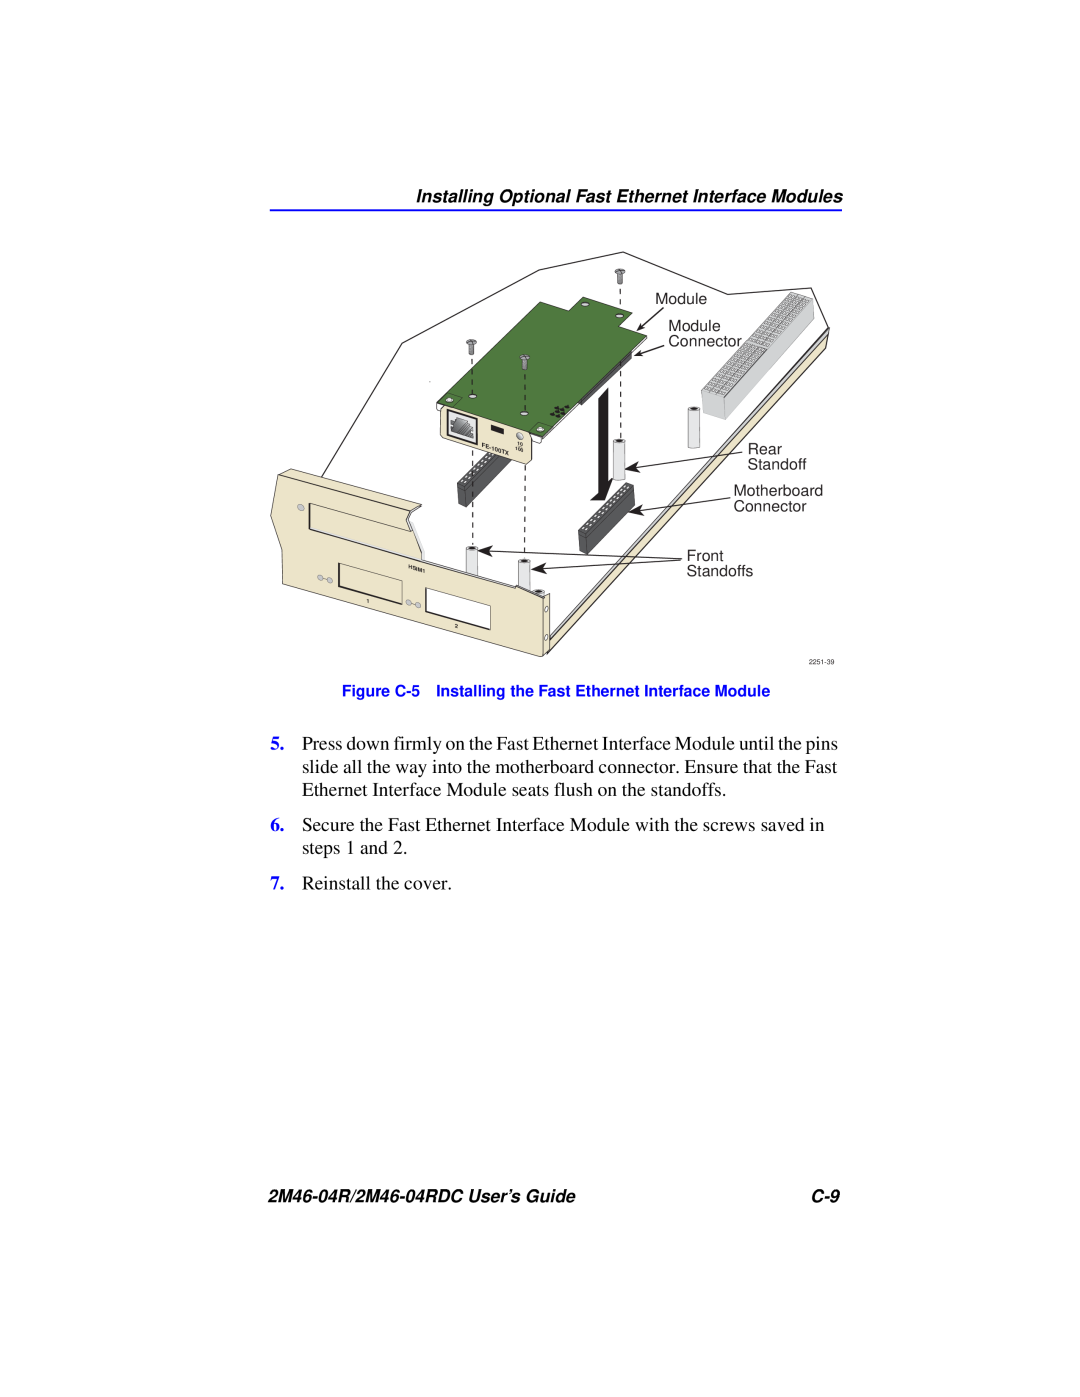 Cabletron Systems pmn manual Reinstall the cover 